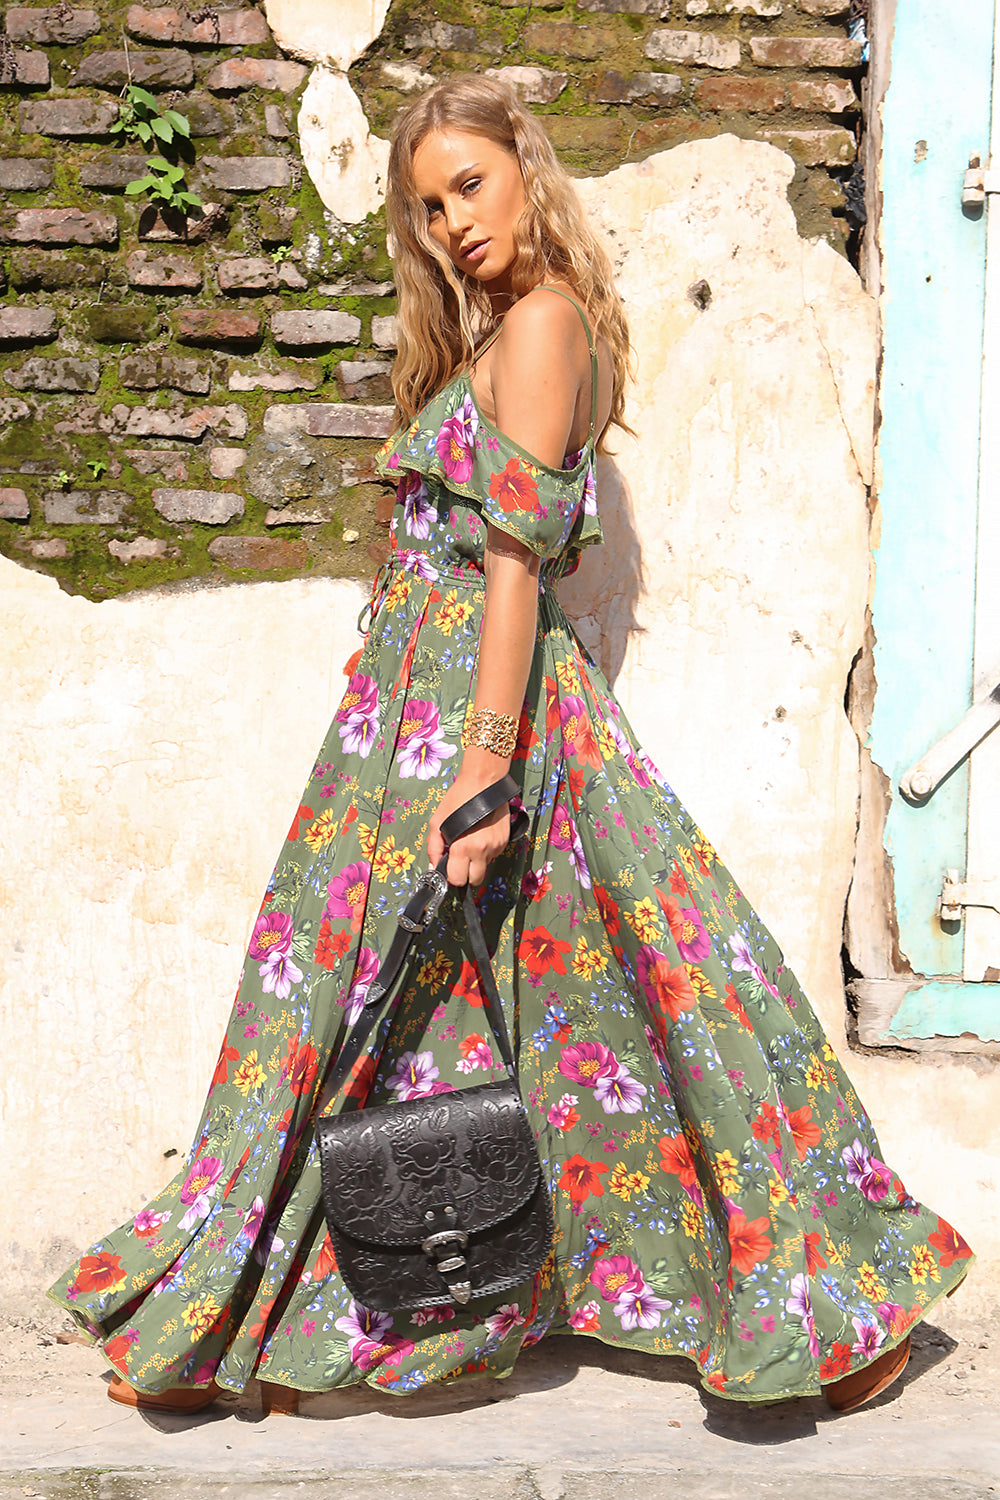 The Gypsy Queen Bag - Vintage Black - Tulle and Batiste